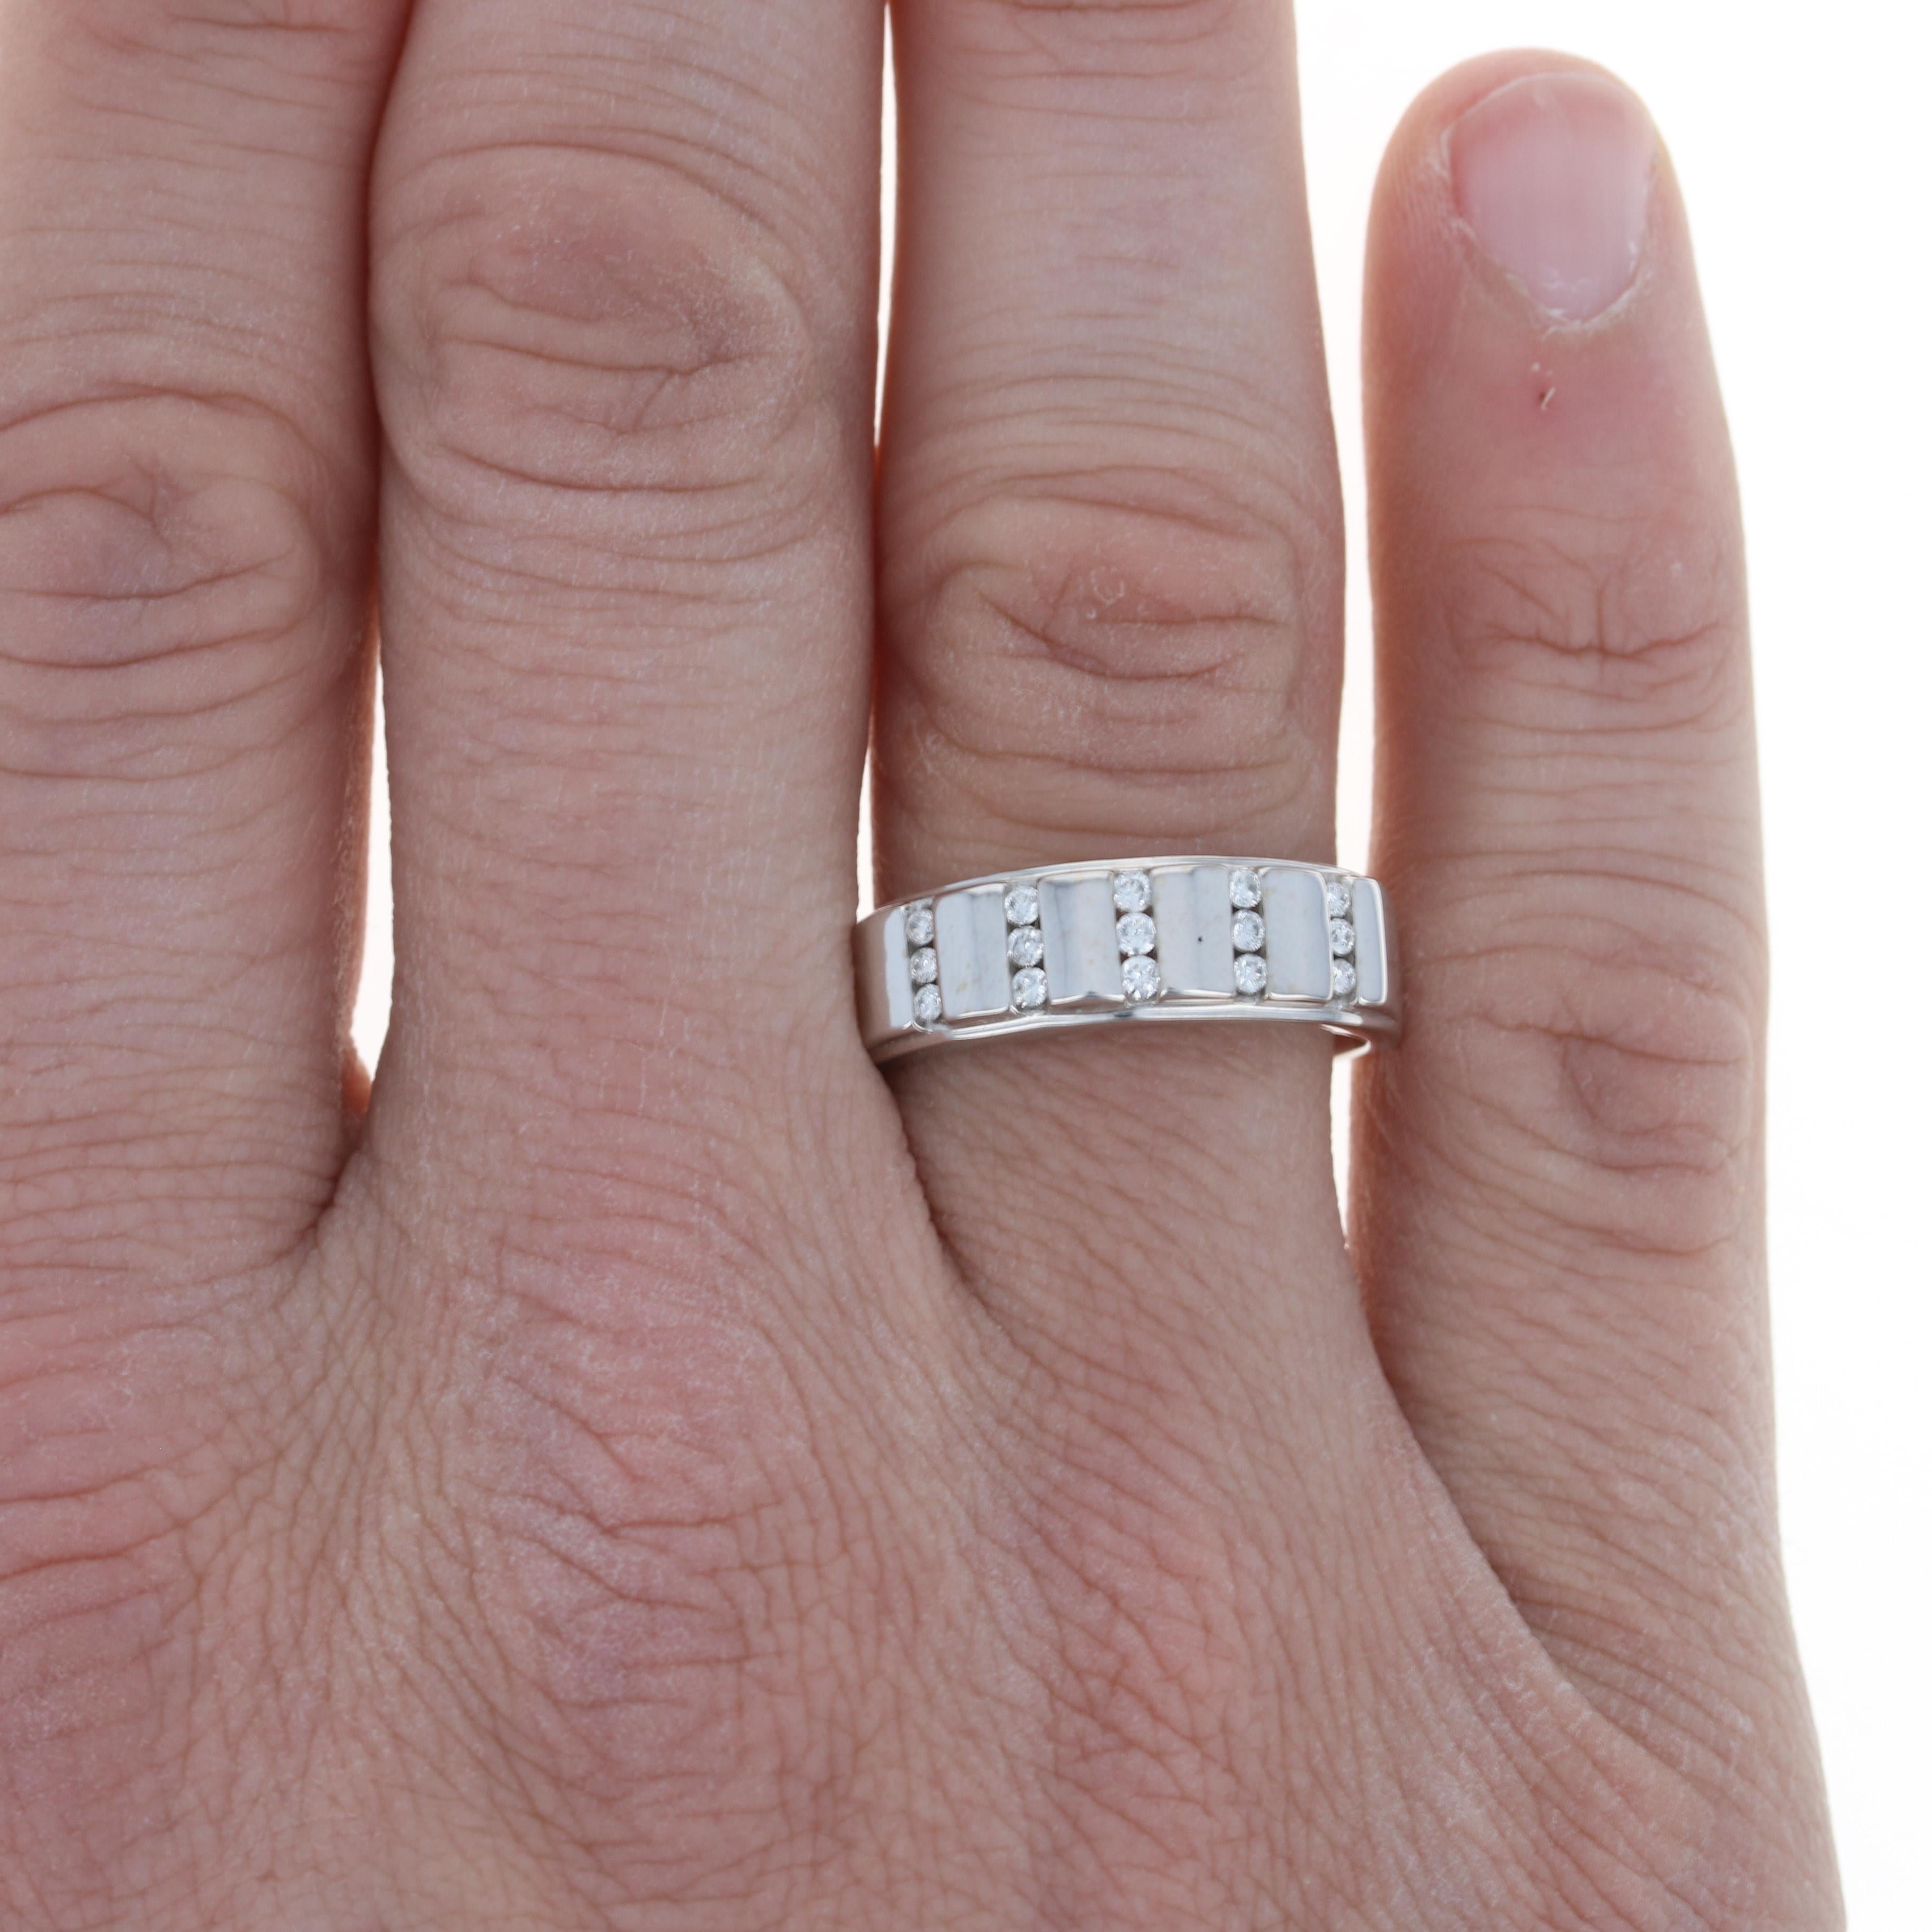 Size: 11 3/4
Sizing Fee: Up 2 sizes for $50

Metal Content: 14k White Gold 

Stone Information: 
Natural Diamonds
Total Carats: .25ctw
Cut: Round Brilliant
Color: G - H
Clarity: SI1 - SI2

Style: Wedding Band with Diamonds
Features: Ribbed